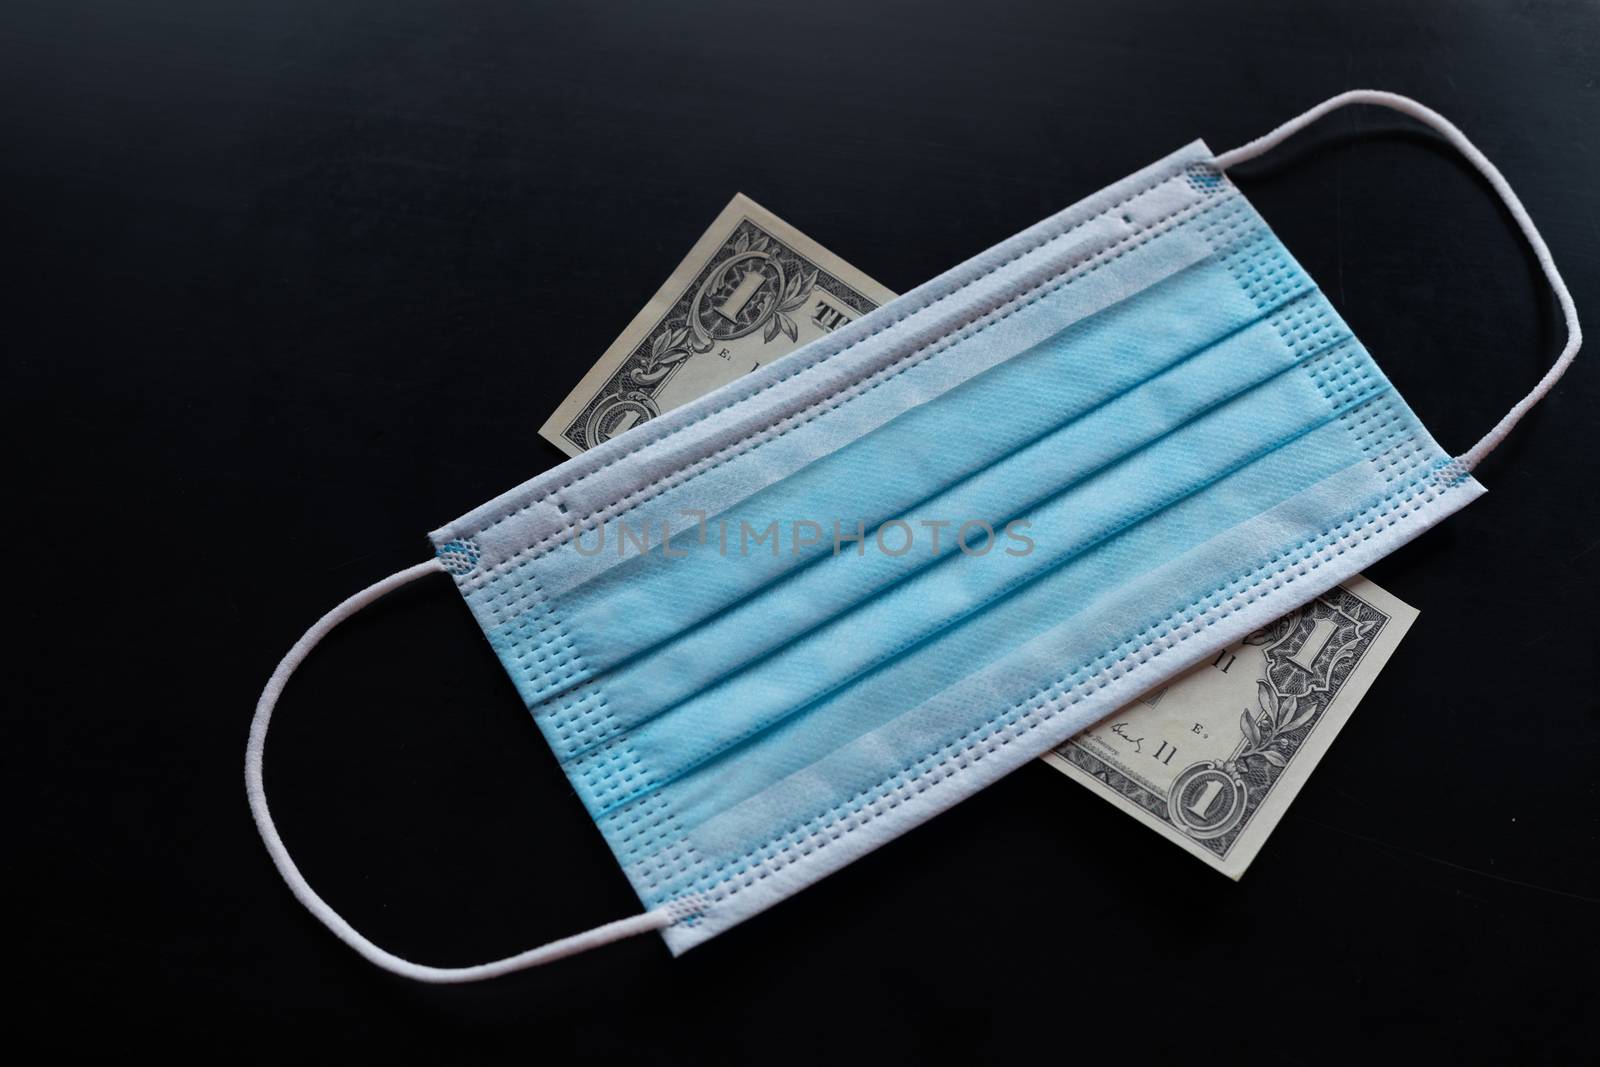 Cost of prevention corona virus - money and preventive facemask stock photo